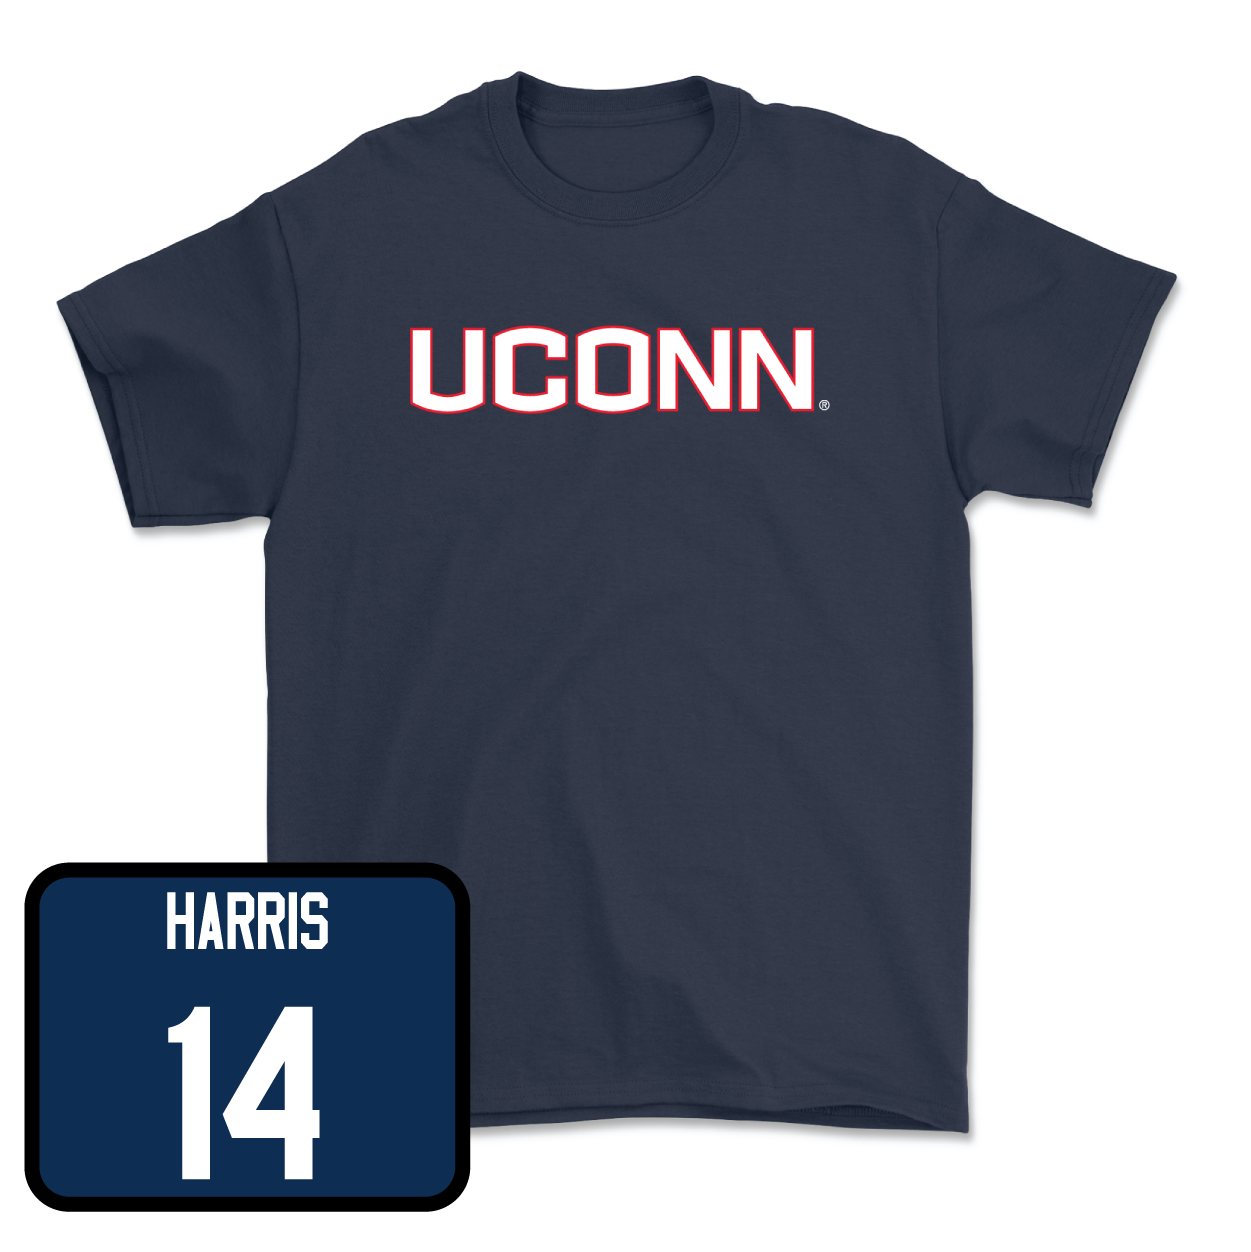 Navy Women's Rowing UConn Tee Youth Small / Bailey Harris